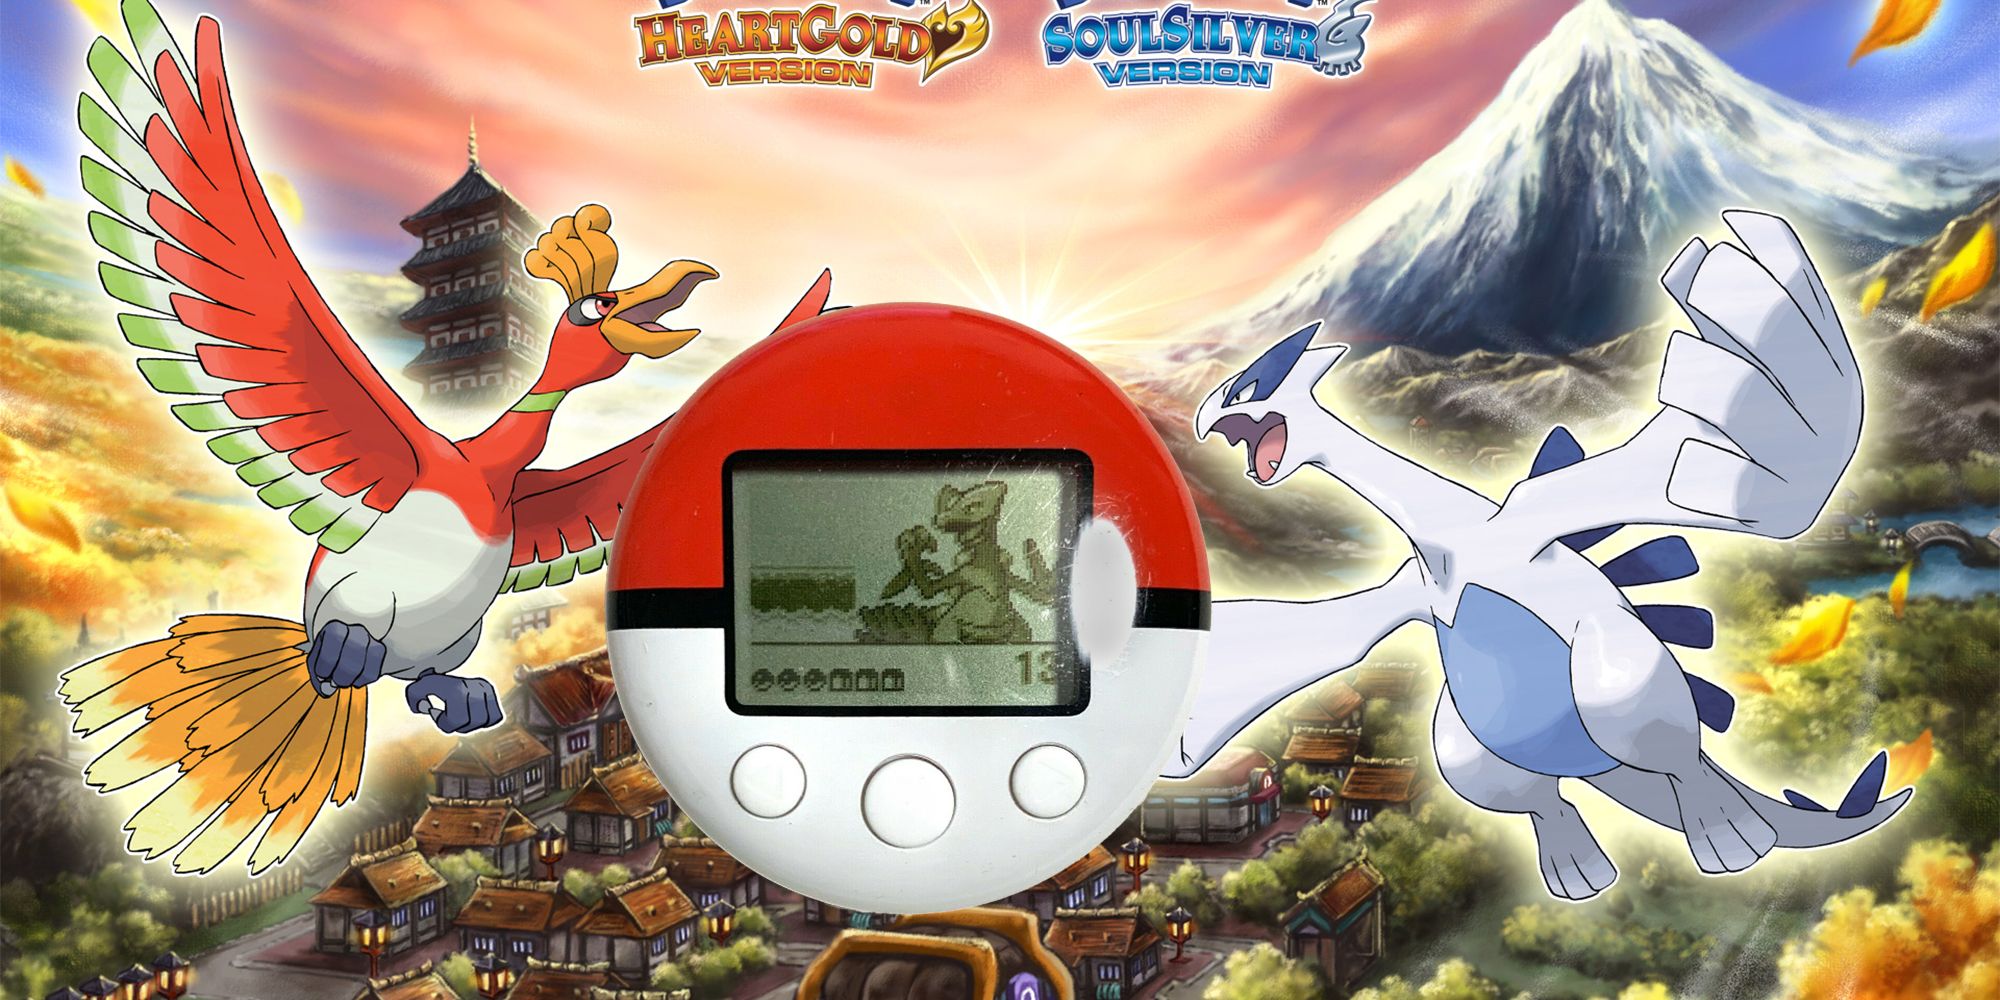 heartgold with pokewalker